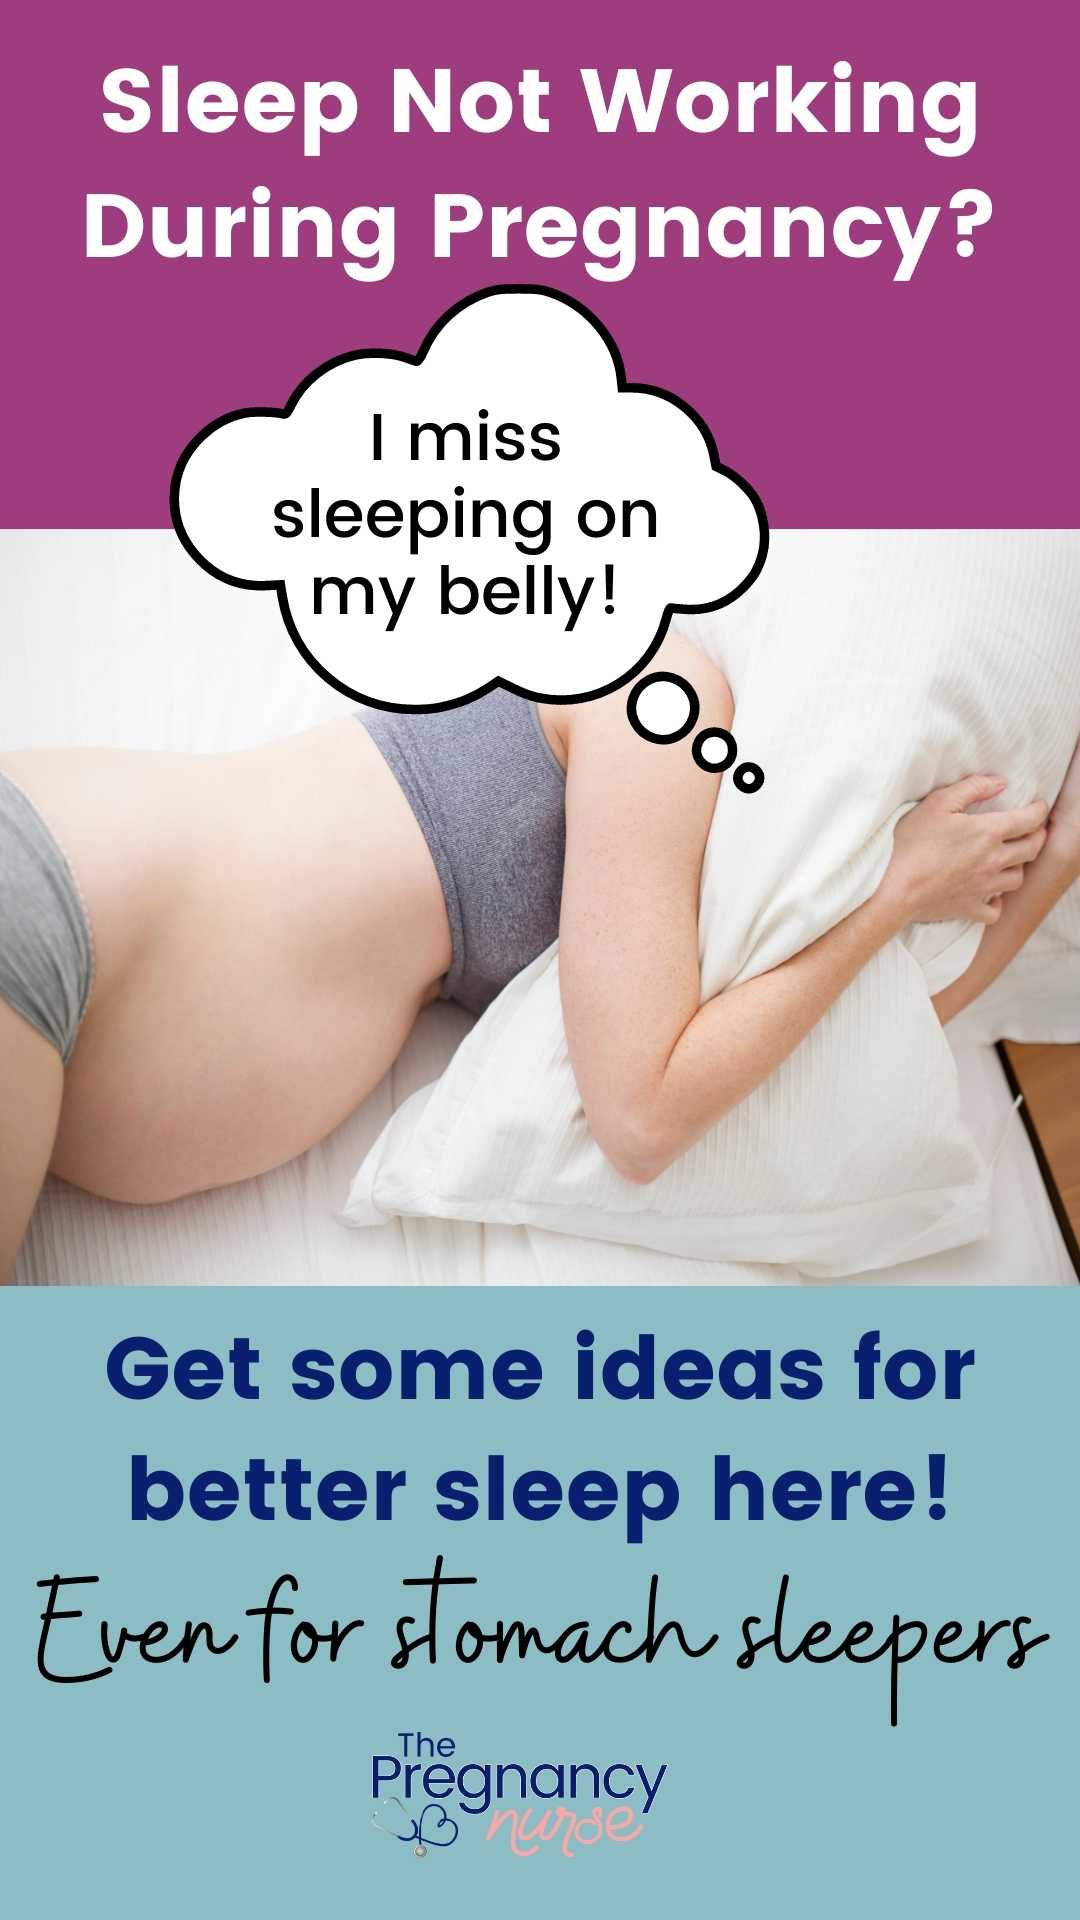 Pregnancy can be uncomfortable, but a pregnancy pillow can help. Learn about the benefits of using a pregnancy pillow and find out which model is right for you.